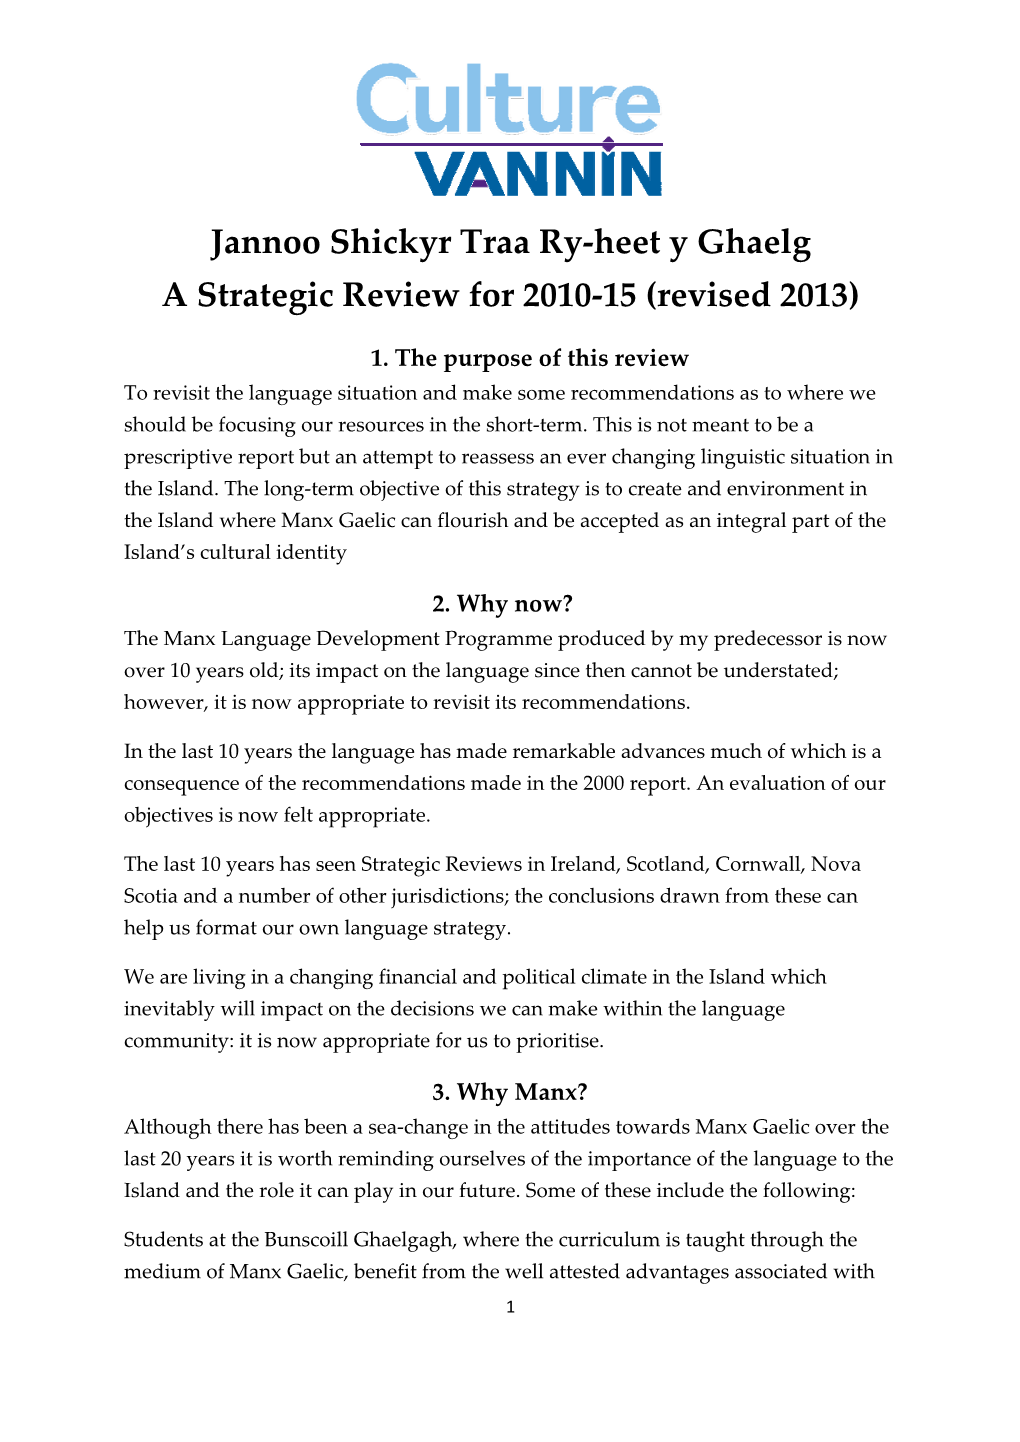 Jannoo Shickyr Traa Ry-Heet Y Ghaelg a Strategic Review for 2010